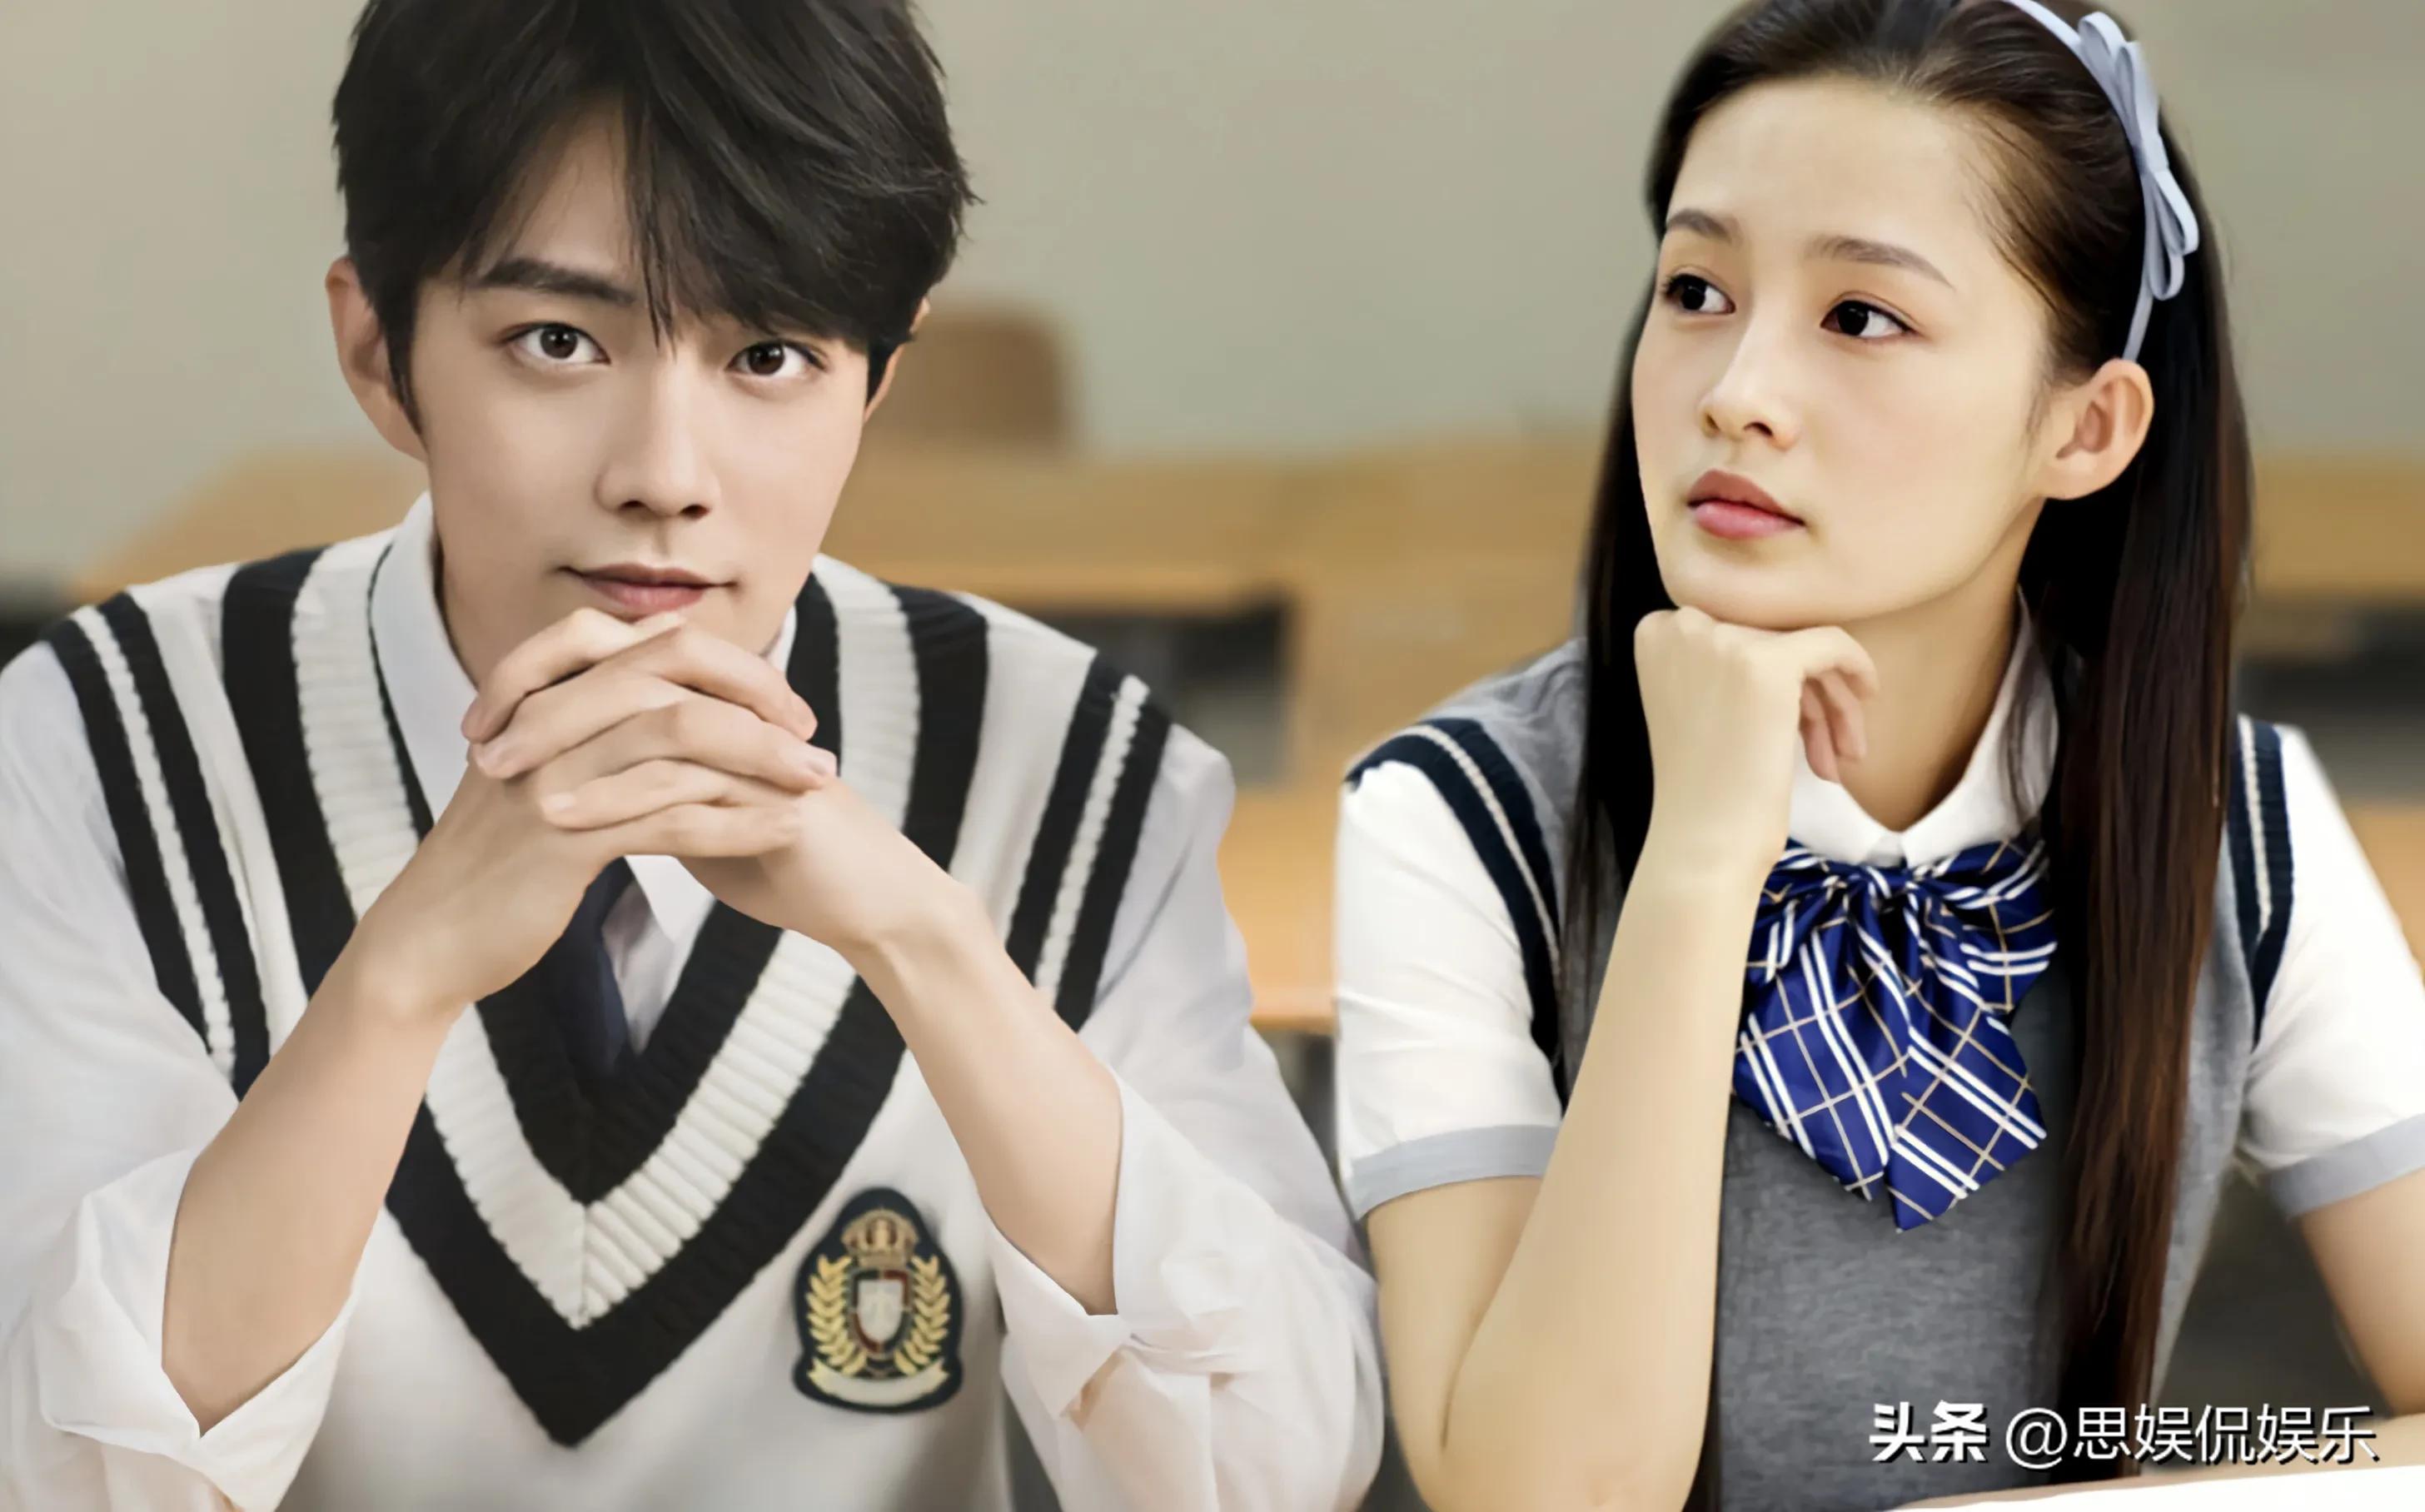 Xiao Zhan was forced to pull CP, Li Qin was scolded - iMedia